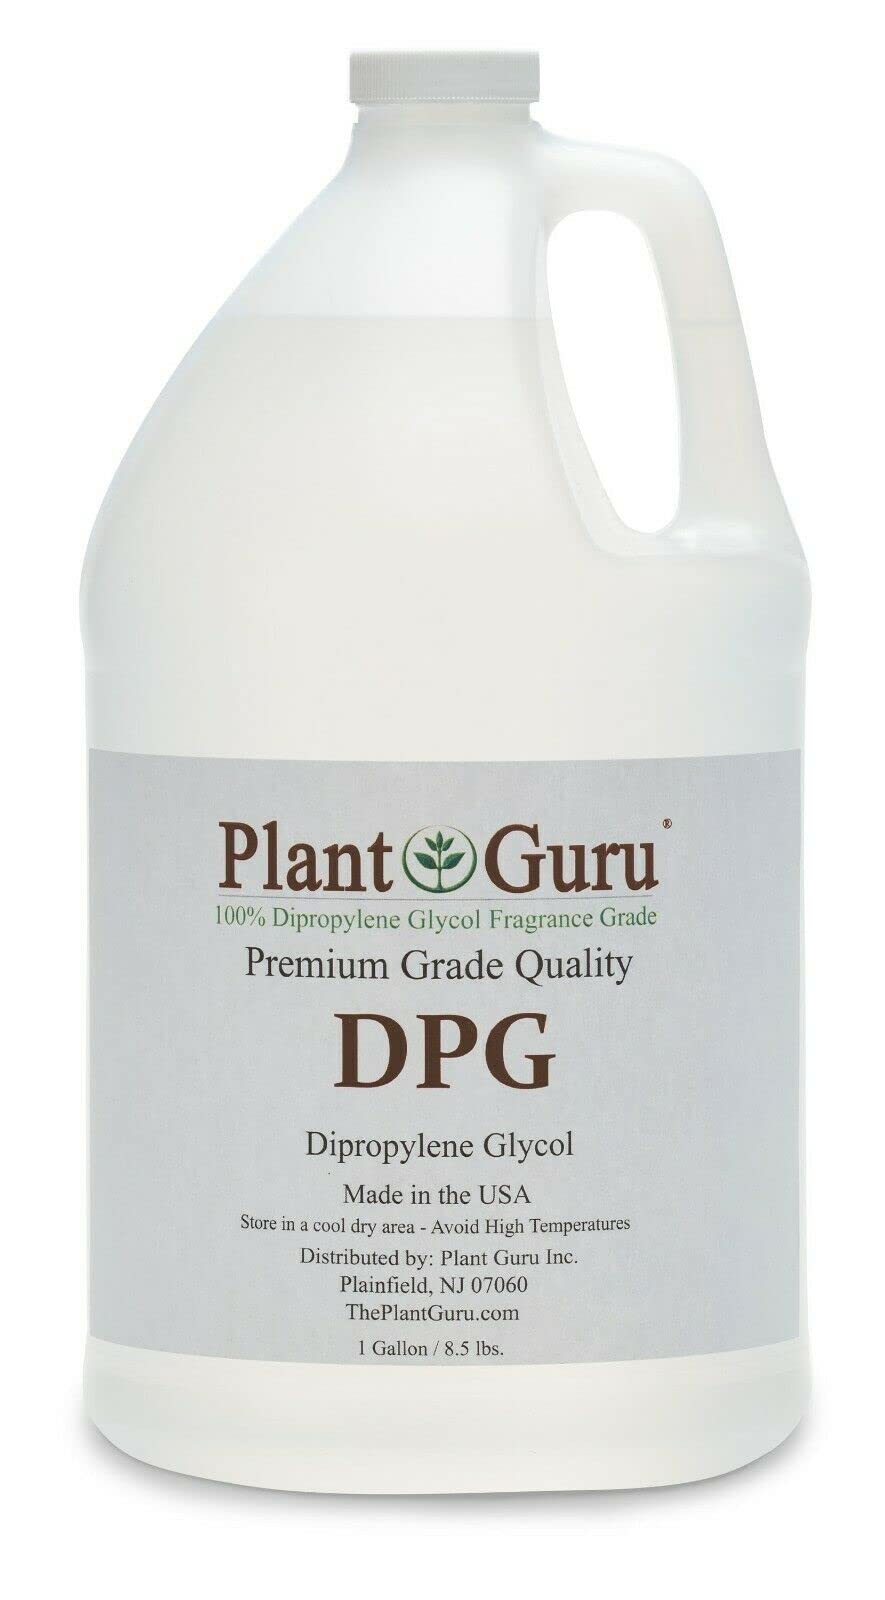 Dipropylene Glycol DPG - 1 Gallon 8.5 lbs. - Fragrance Grade Carrier Oil - Great for Incense Making, Perfume and Body Oils.